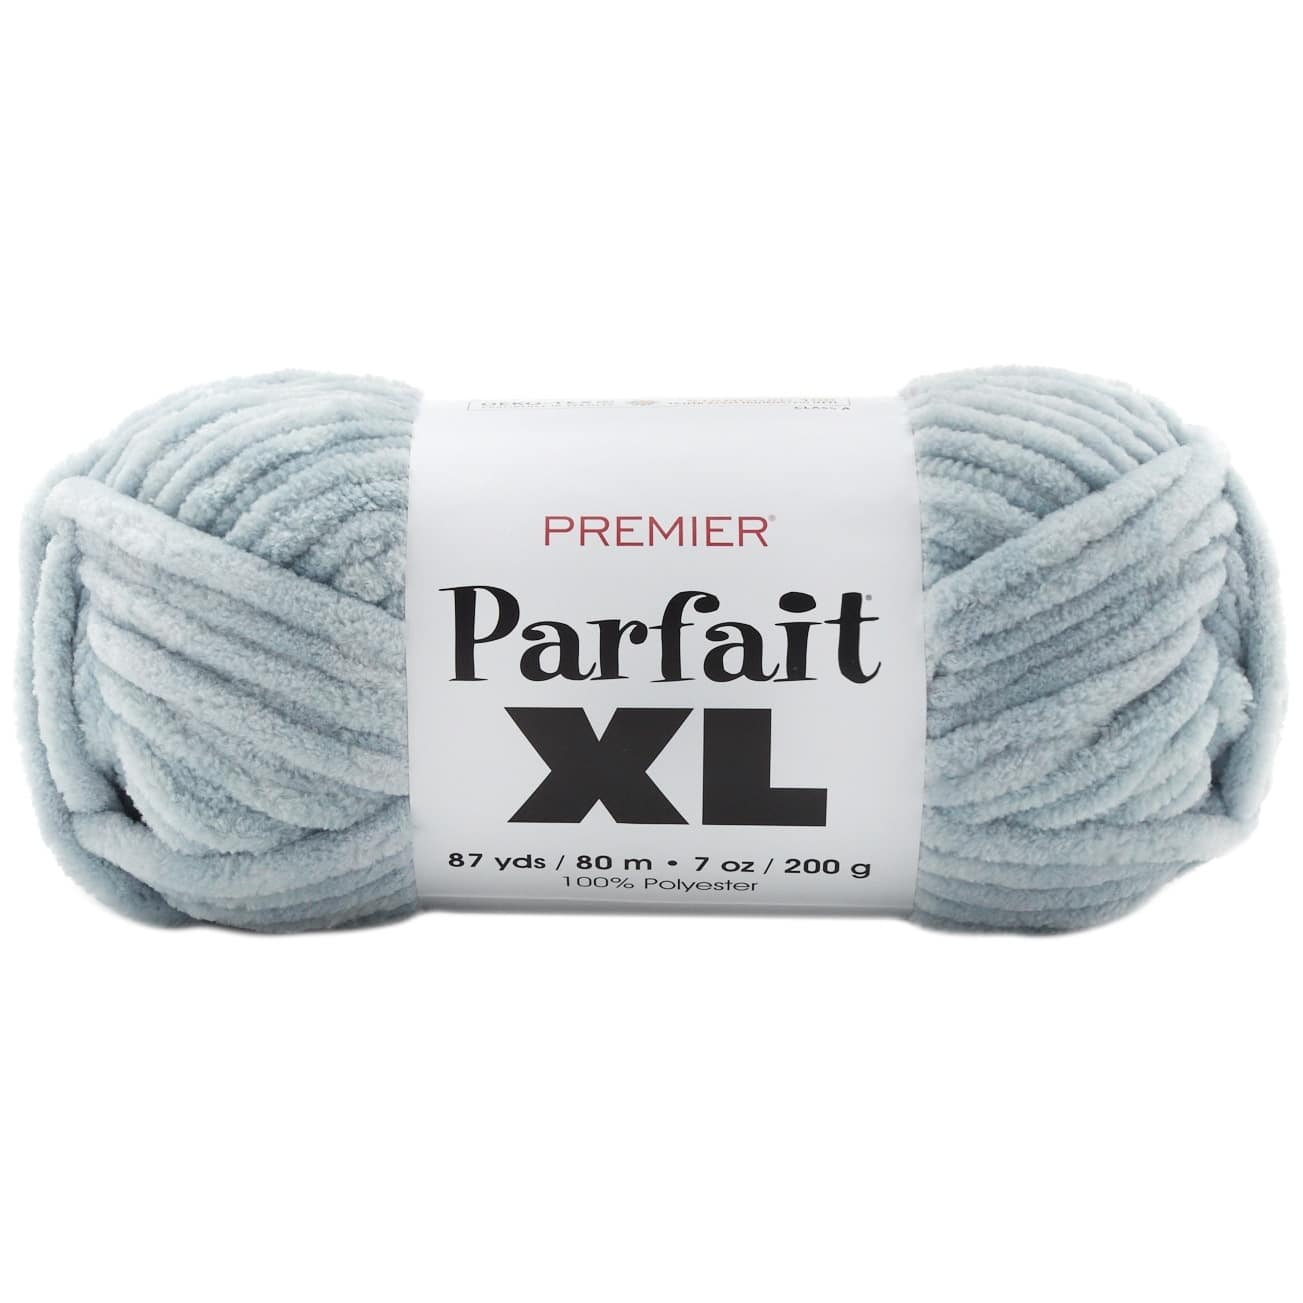 Premier Parfait Chunky Yarn-Pale Gray, 1 - Fry's Food Stores